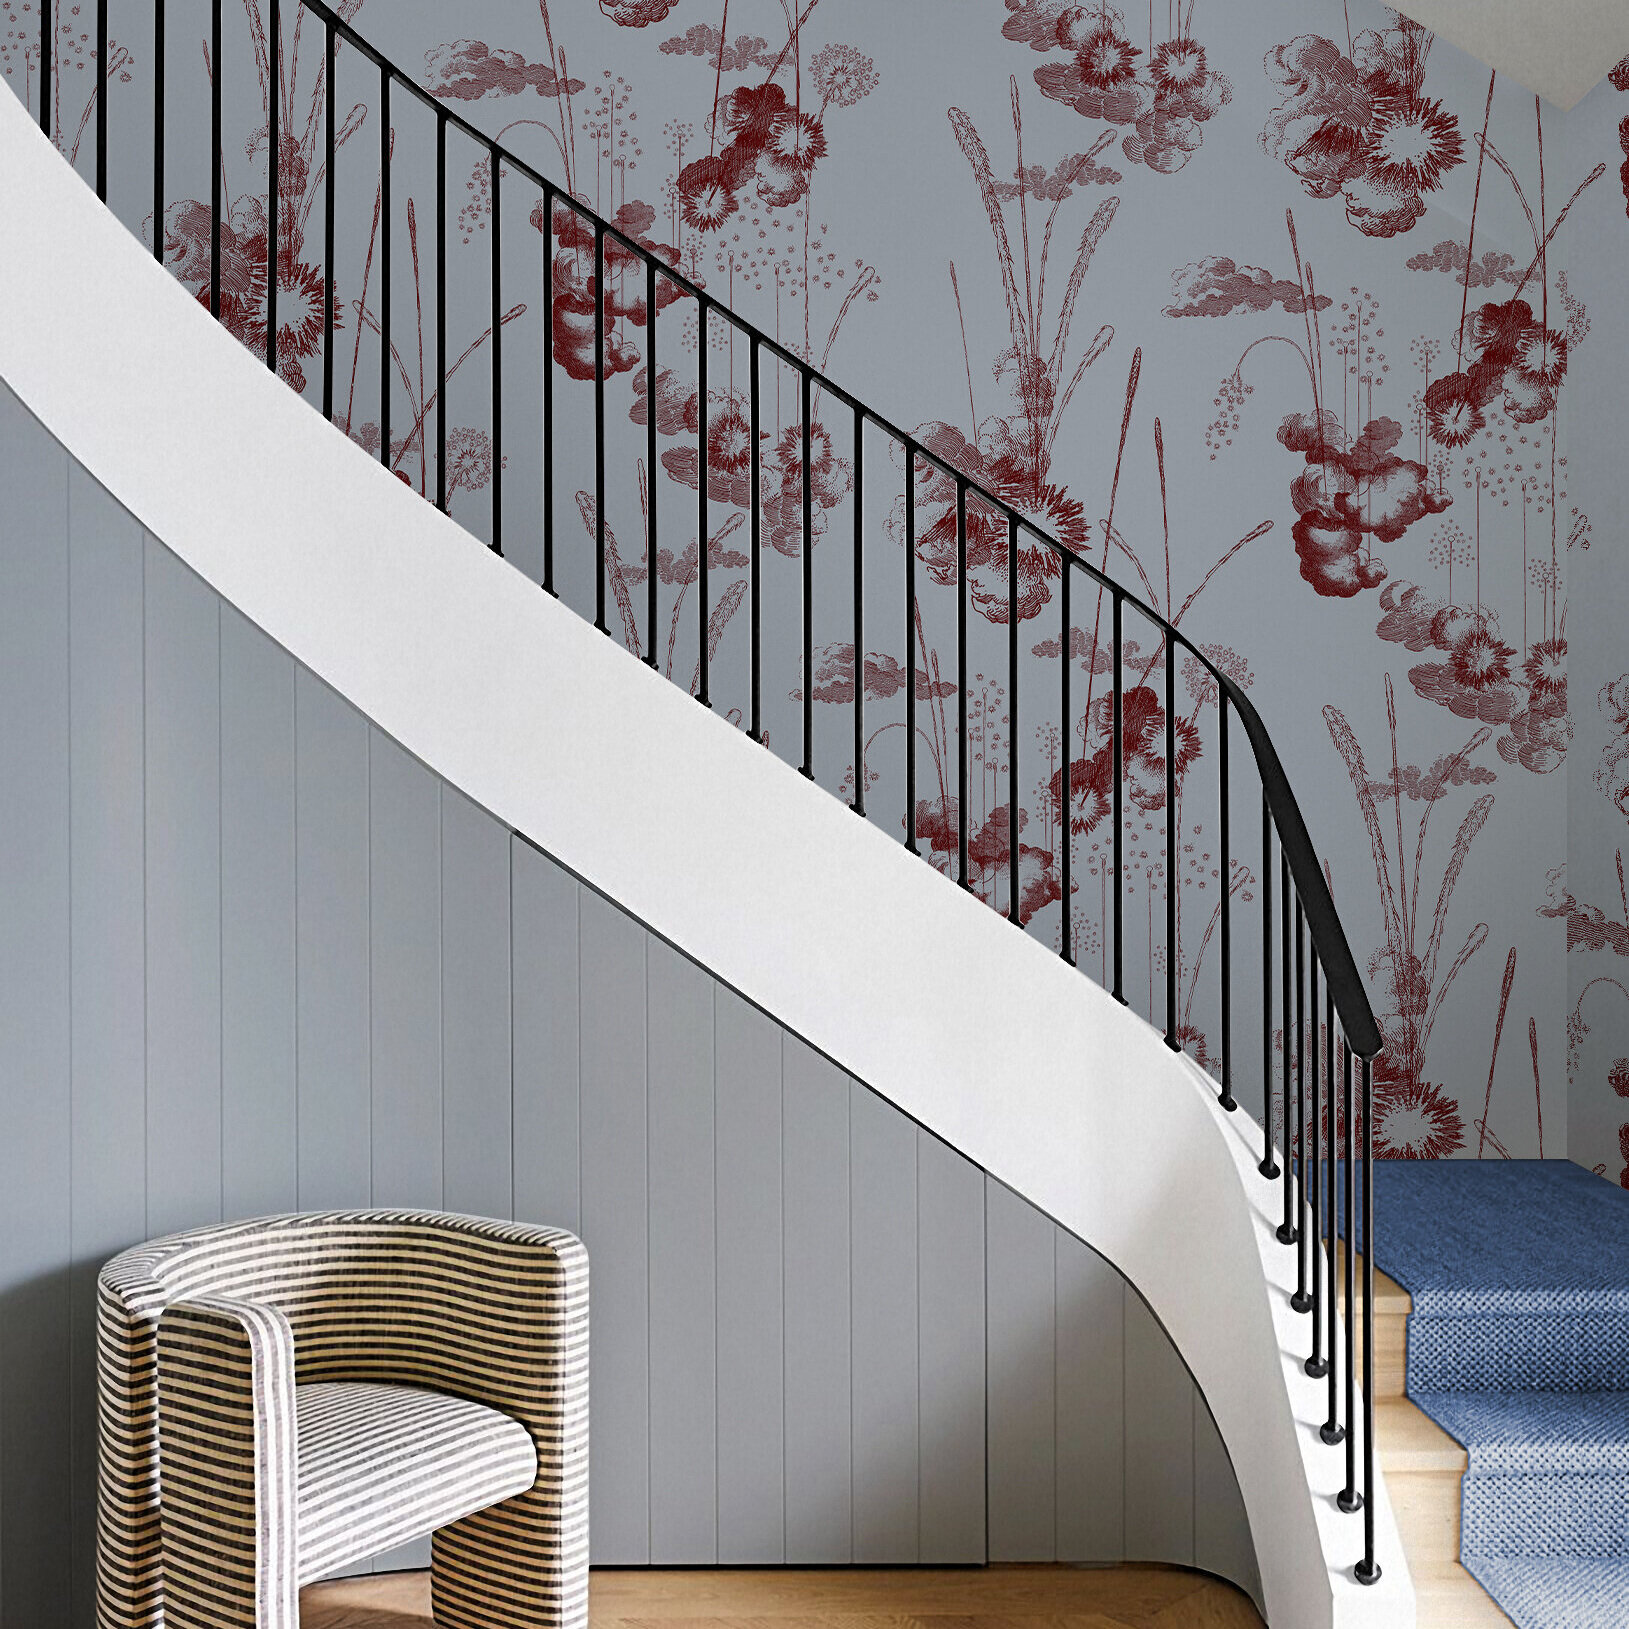 Grand Final - Rust Red, Antique Style Wallpaper, Fireworks, Staircase, Studio DeSimoneWayland